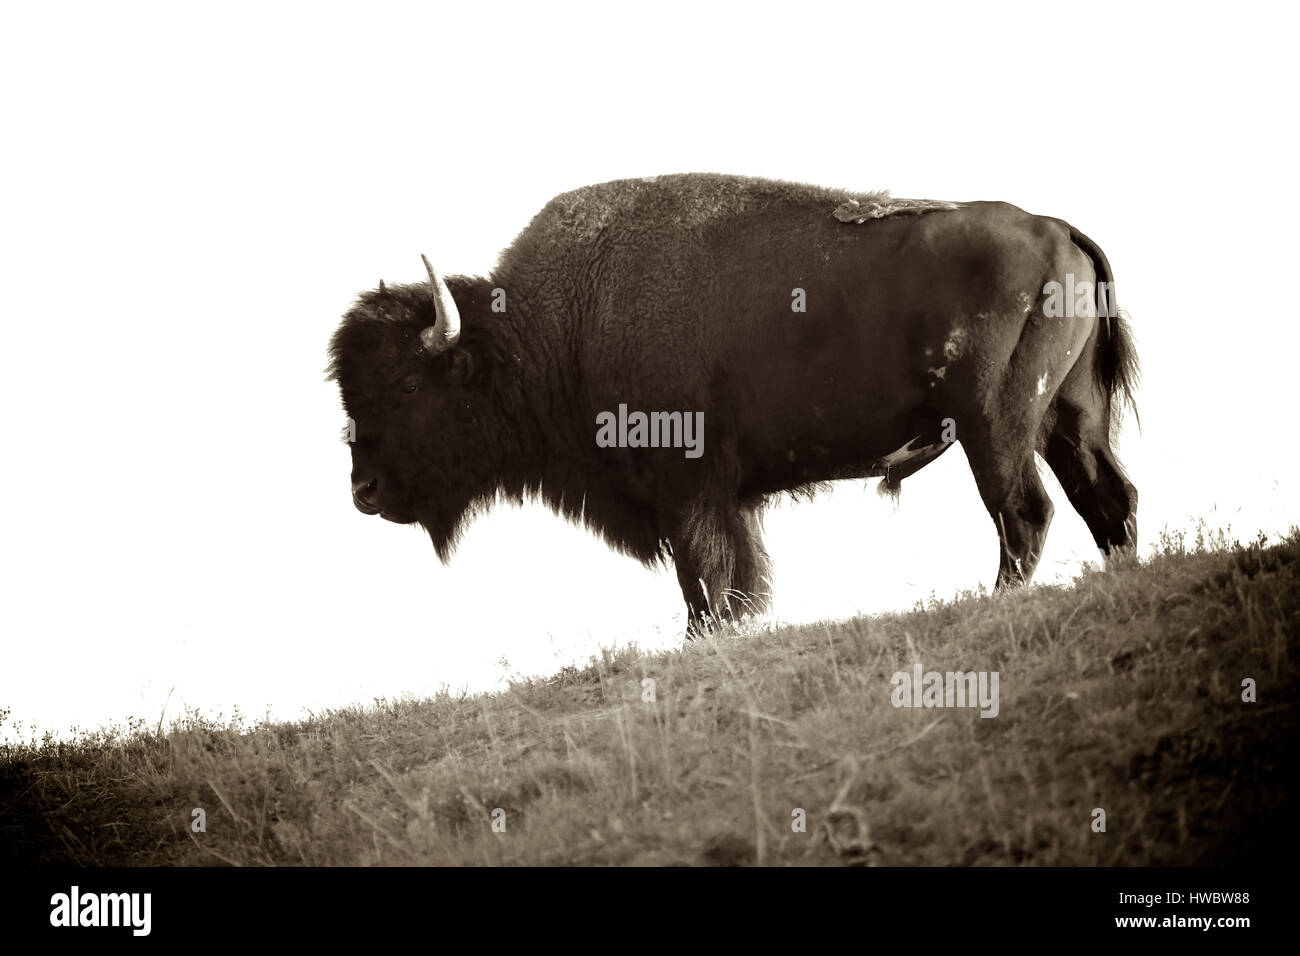 Wild Bull Bison sepia color Yellowstone National Park Stock Photo